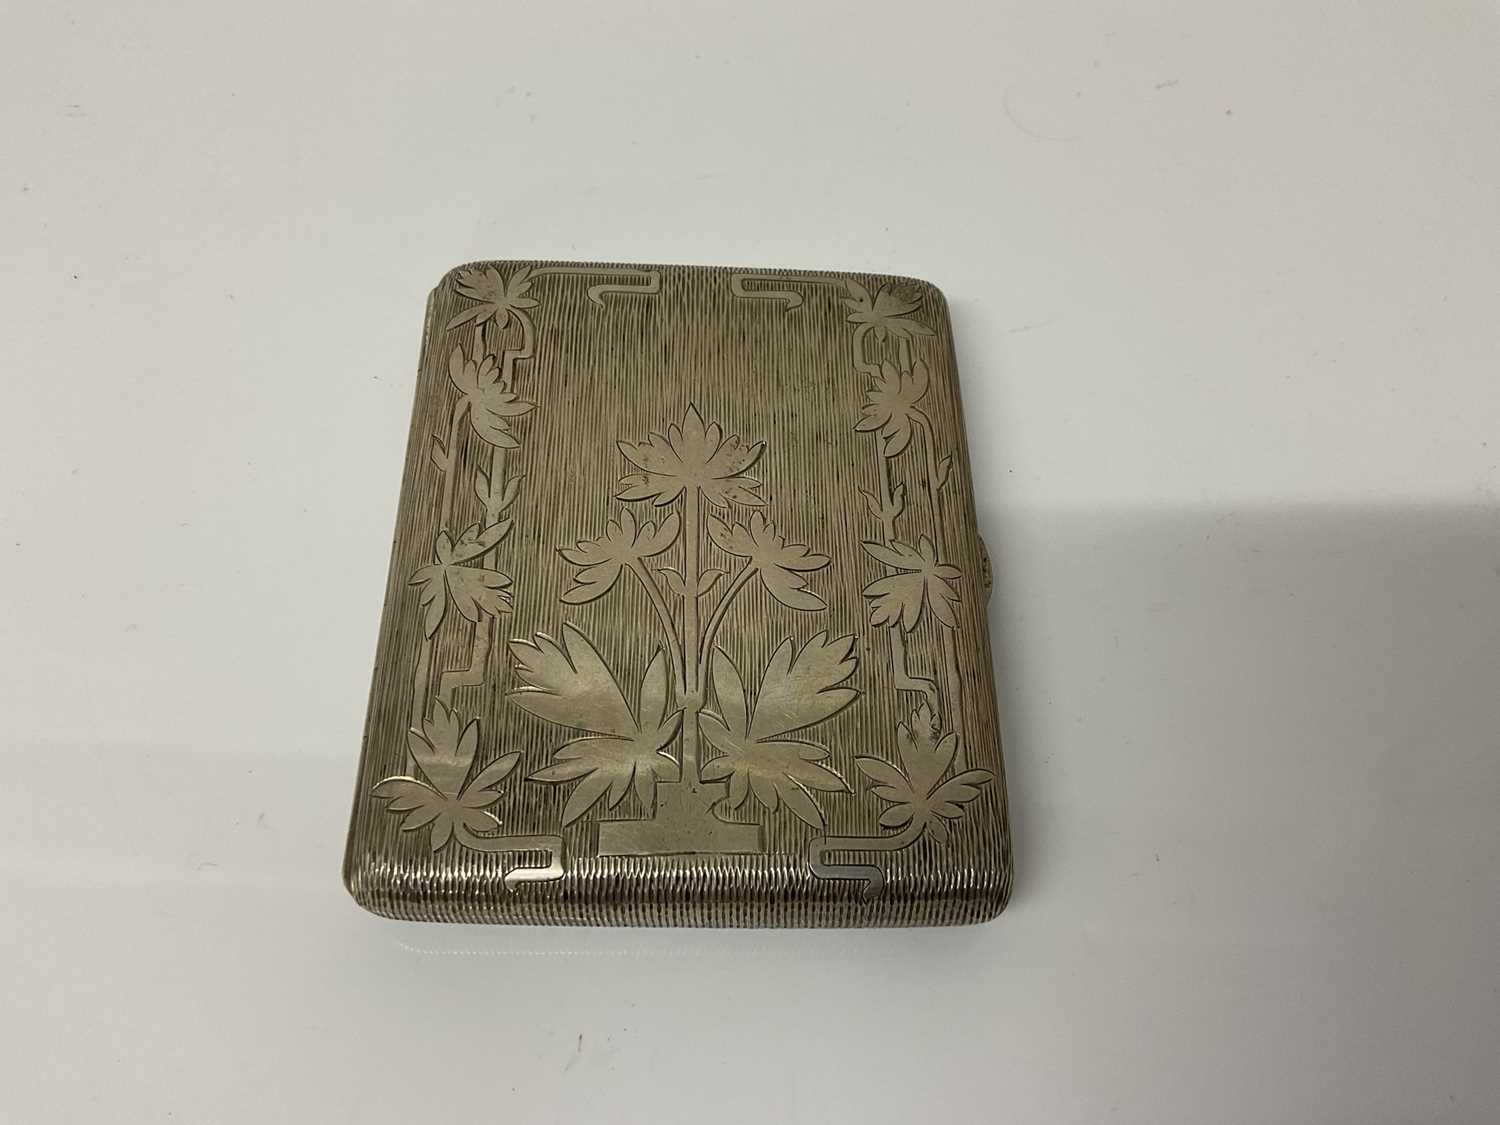 Lot 20 - Early 20th century Continental silver cigarette case of rectangular form with engraved decoration and gilded interior, (stamped 800 to interior), 9.5cm in overall length, all at 4.4ozs (2)